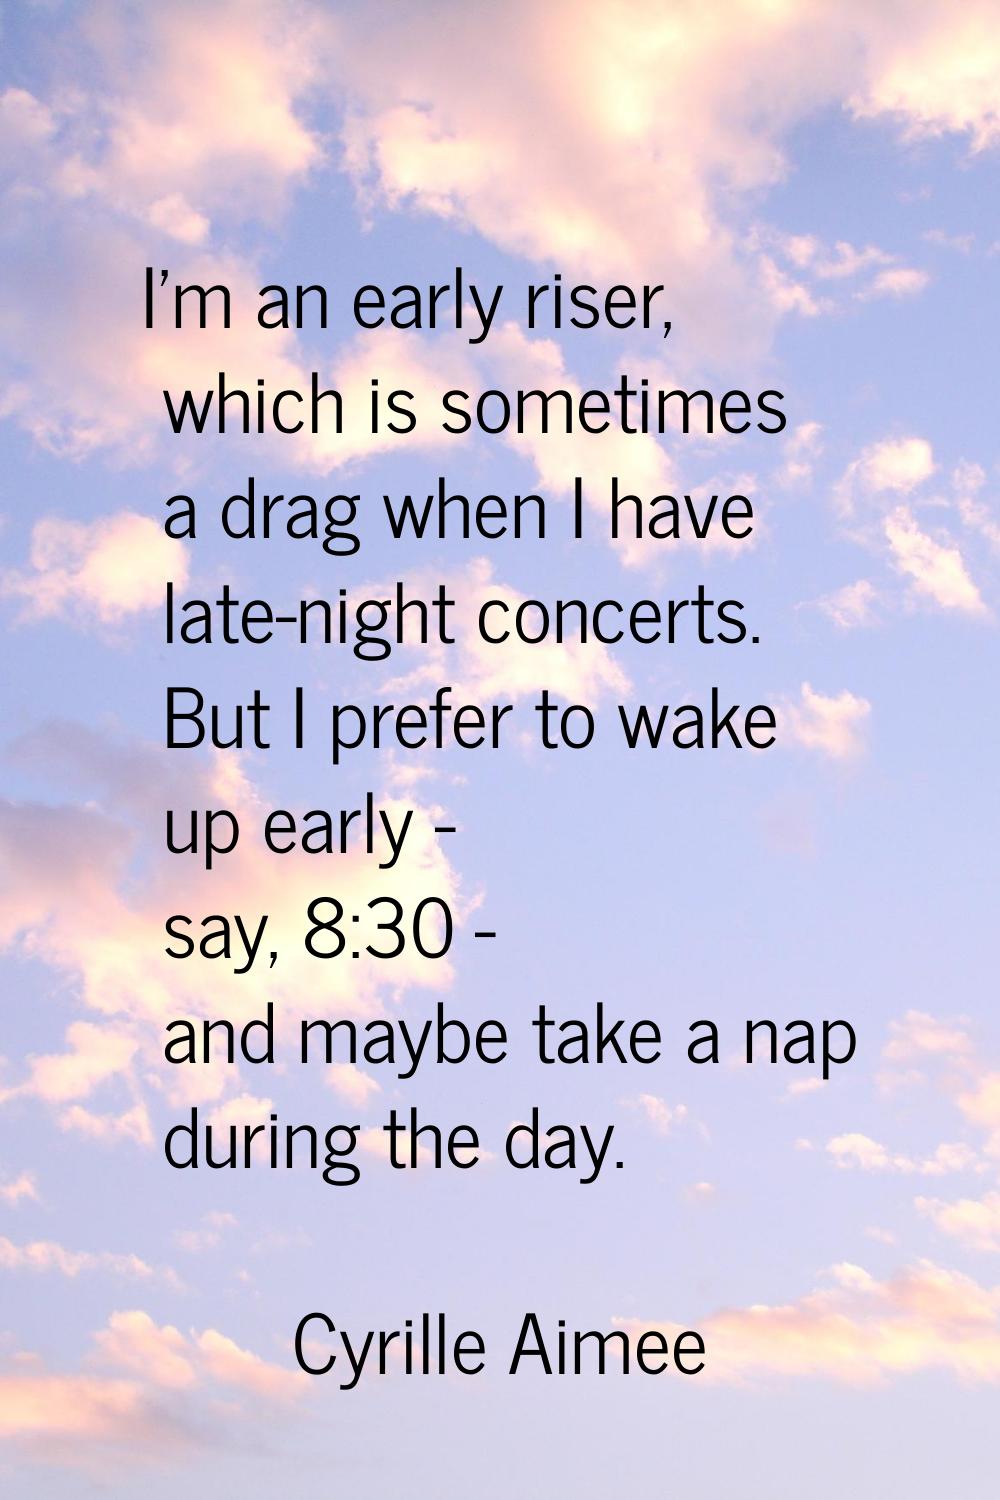 I'm an early riser, which is sometimes a drag when I have late-night concerts. But I prefer to wake